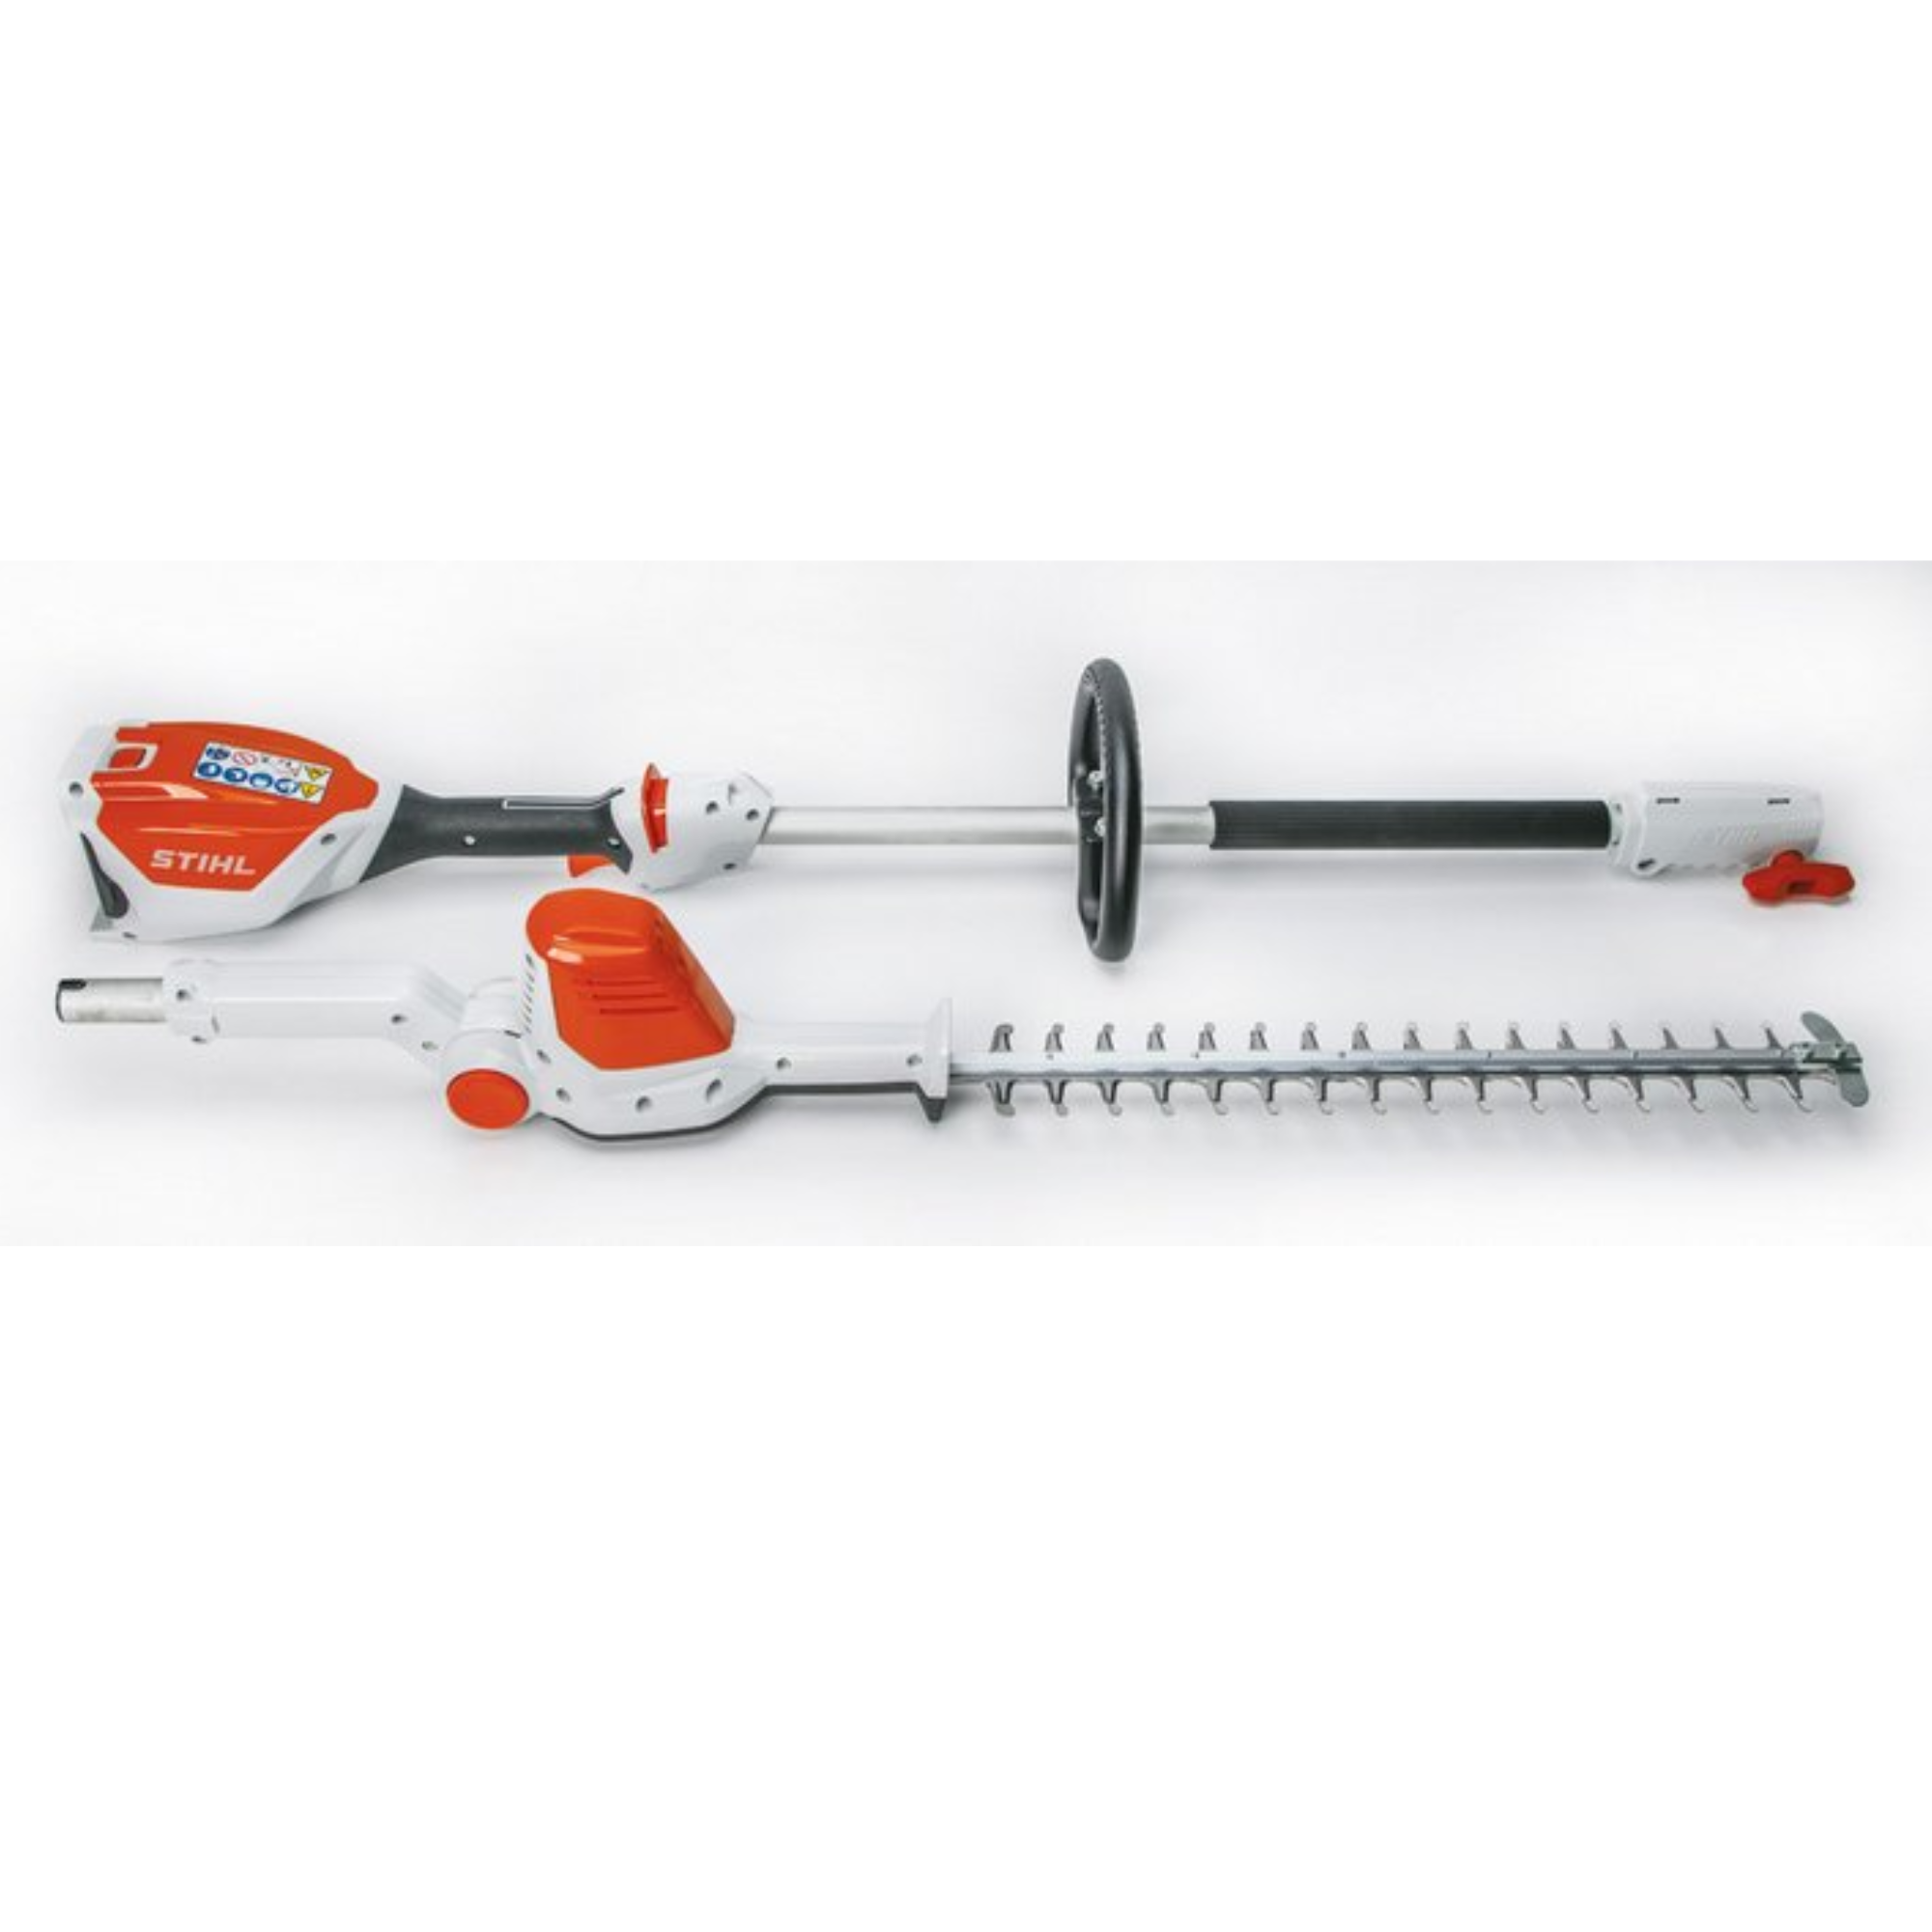 Stihl HLA 56 18 Battery Powered Cordless Extended Reach Hedge Trimmer | Tool Only